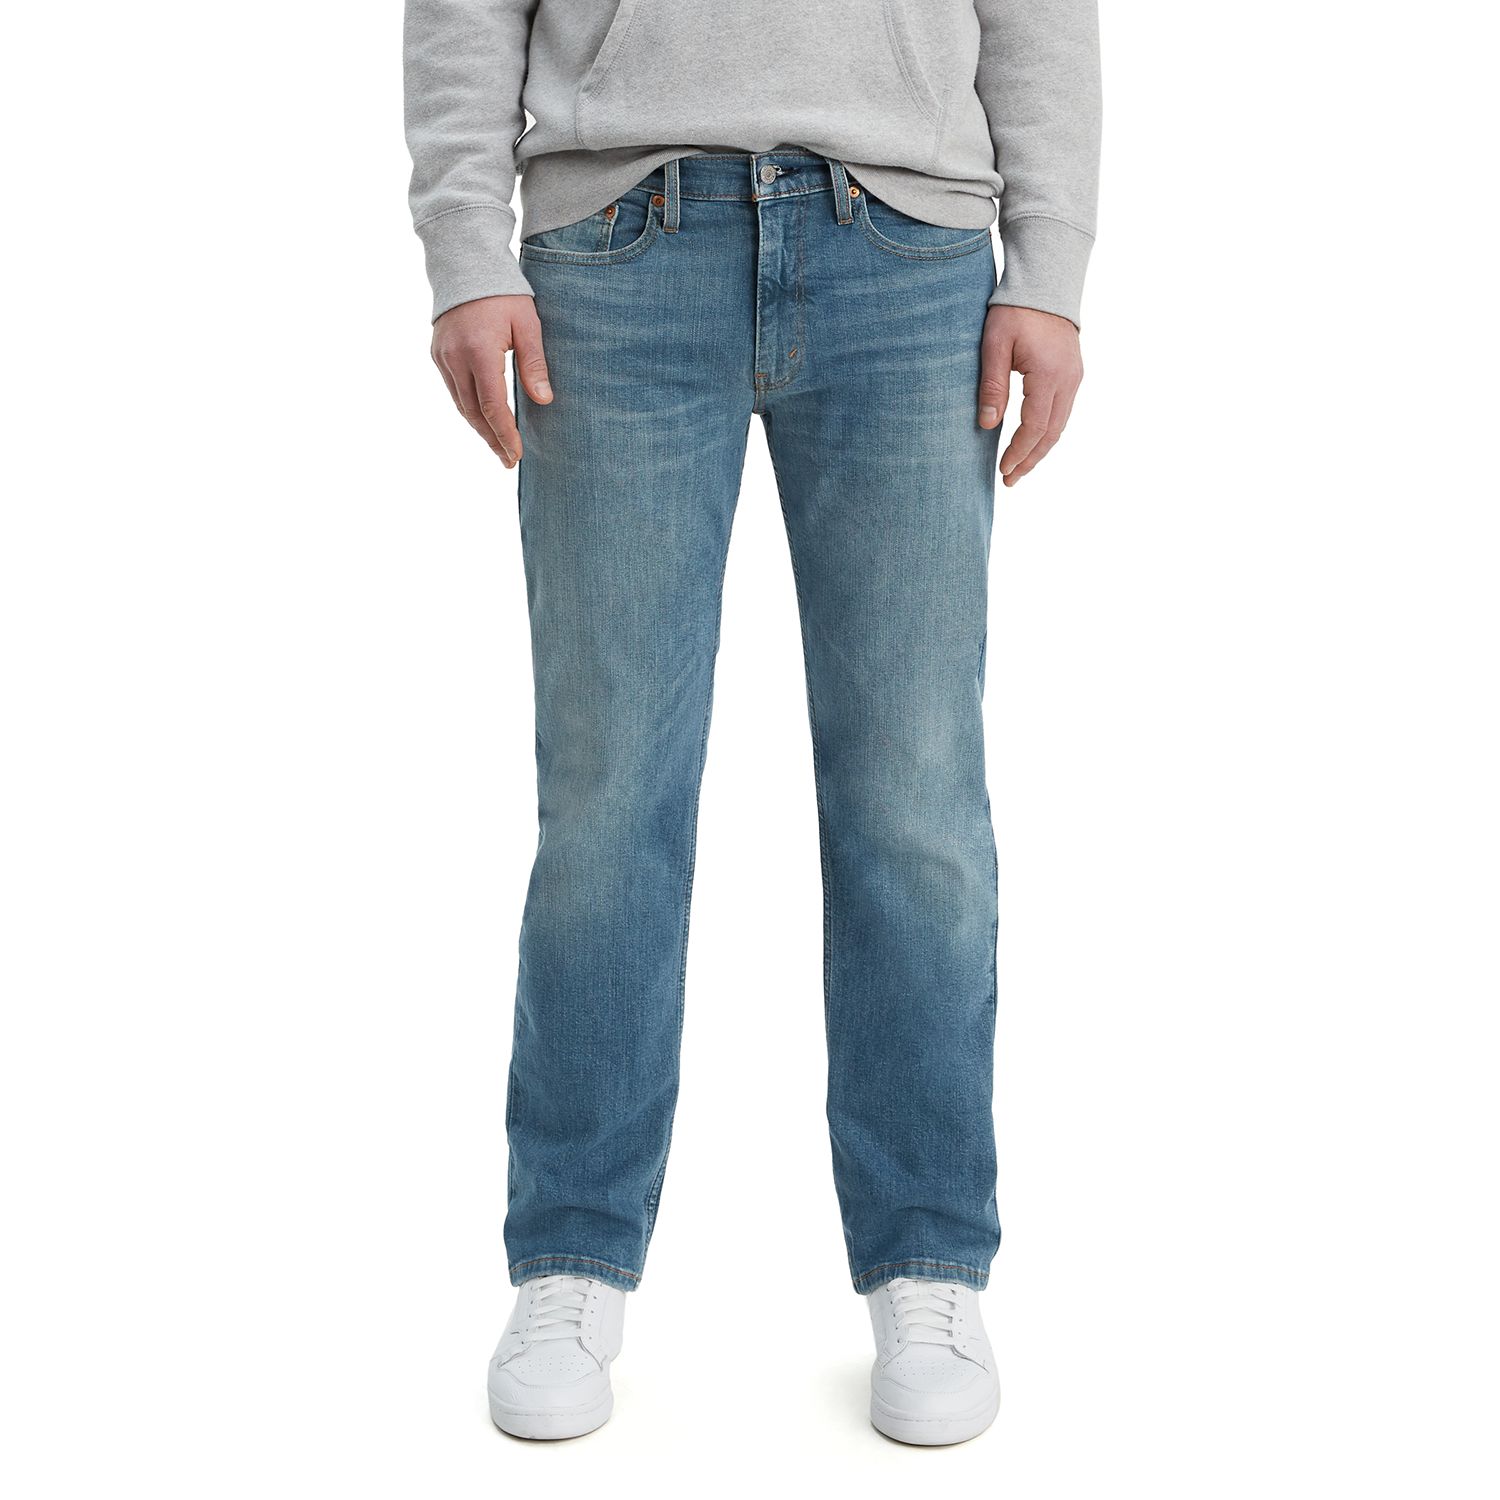 mens green stretch jeans